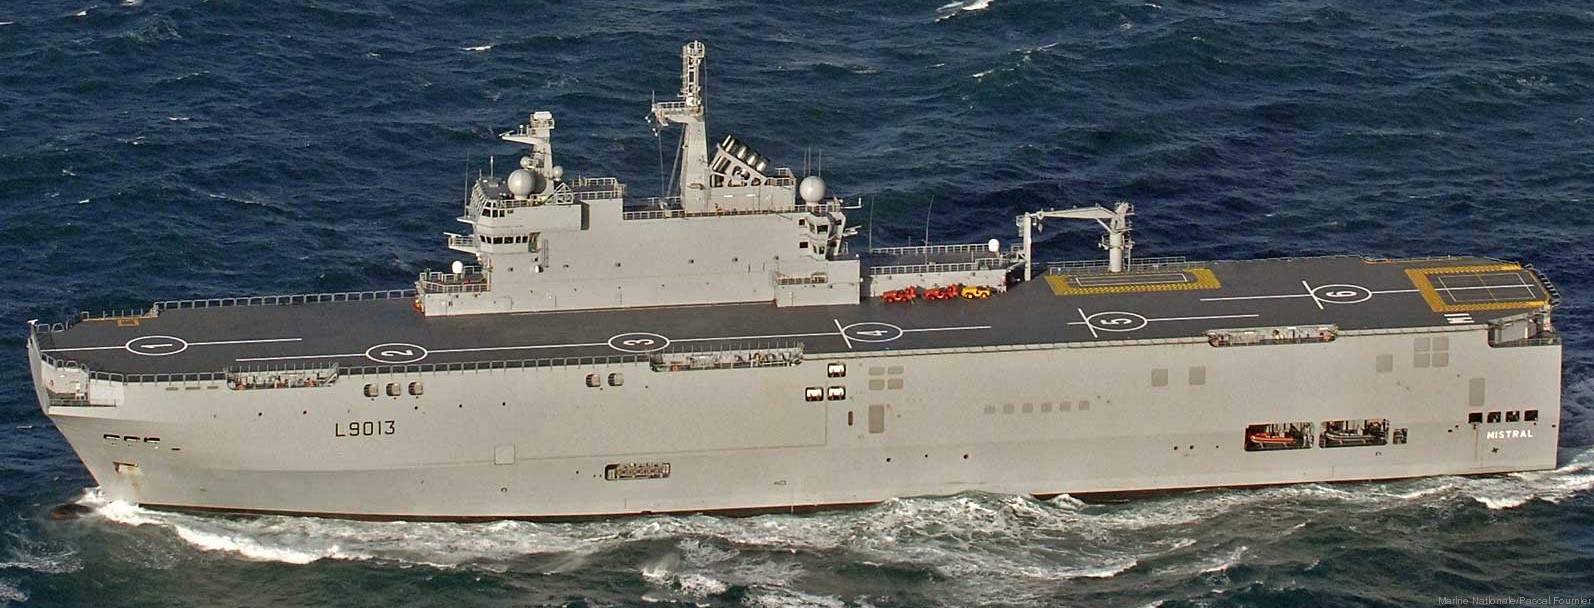 l-9013 fs mistral amphibious assault command ship french navy marine nationale 05